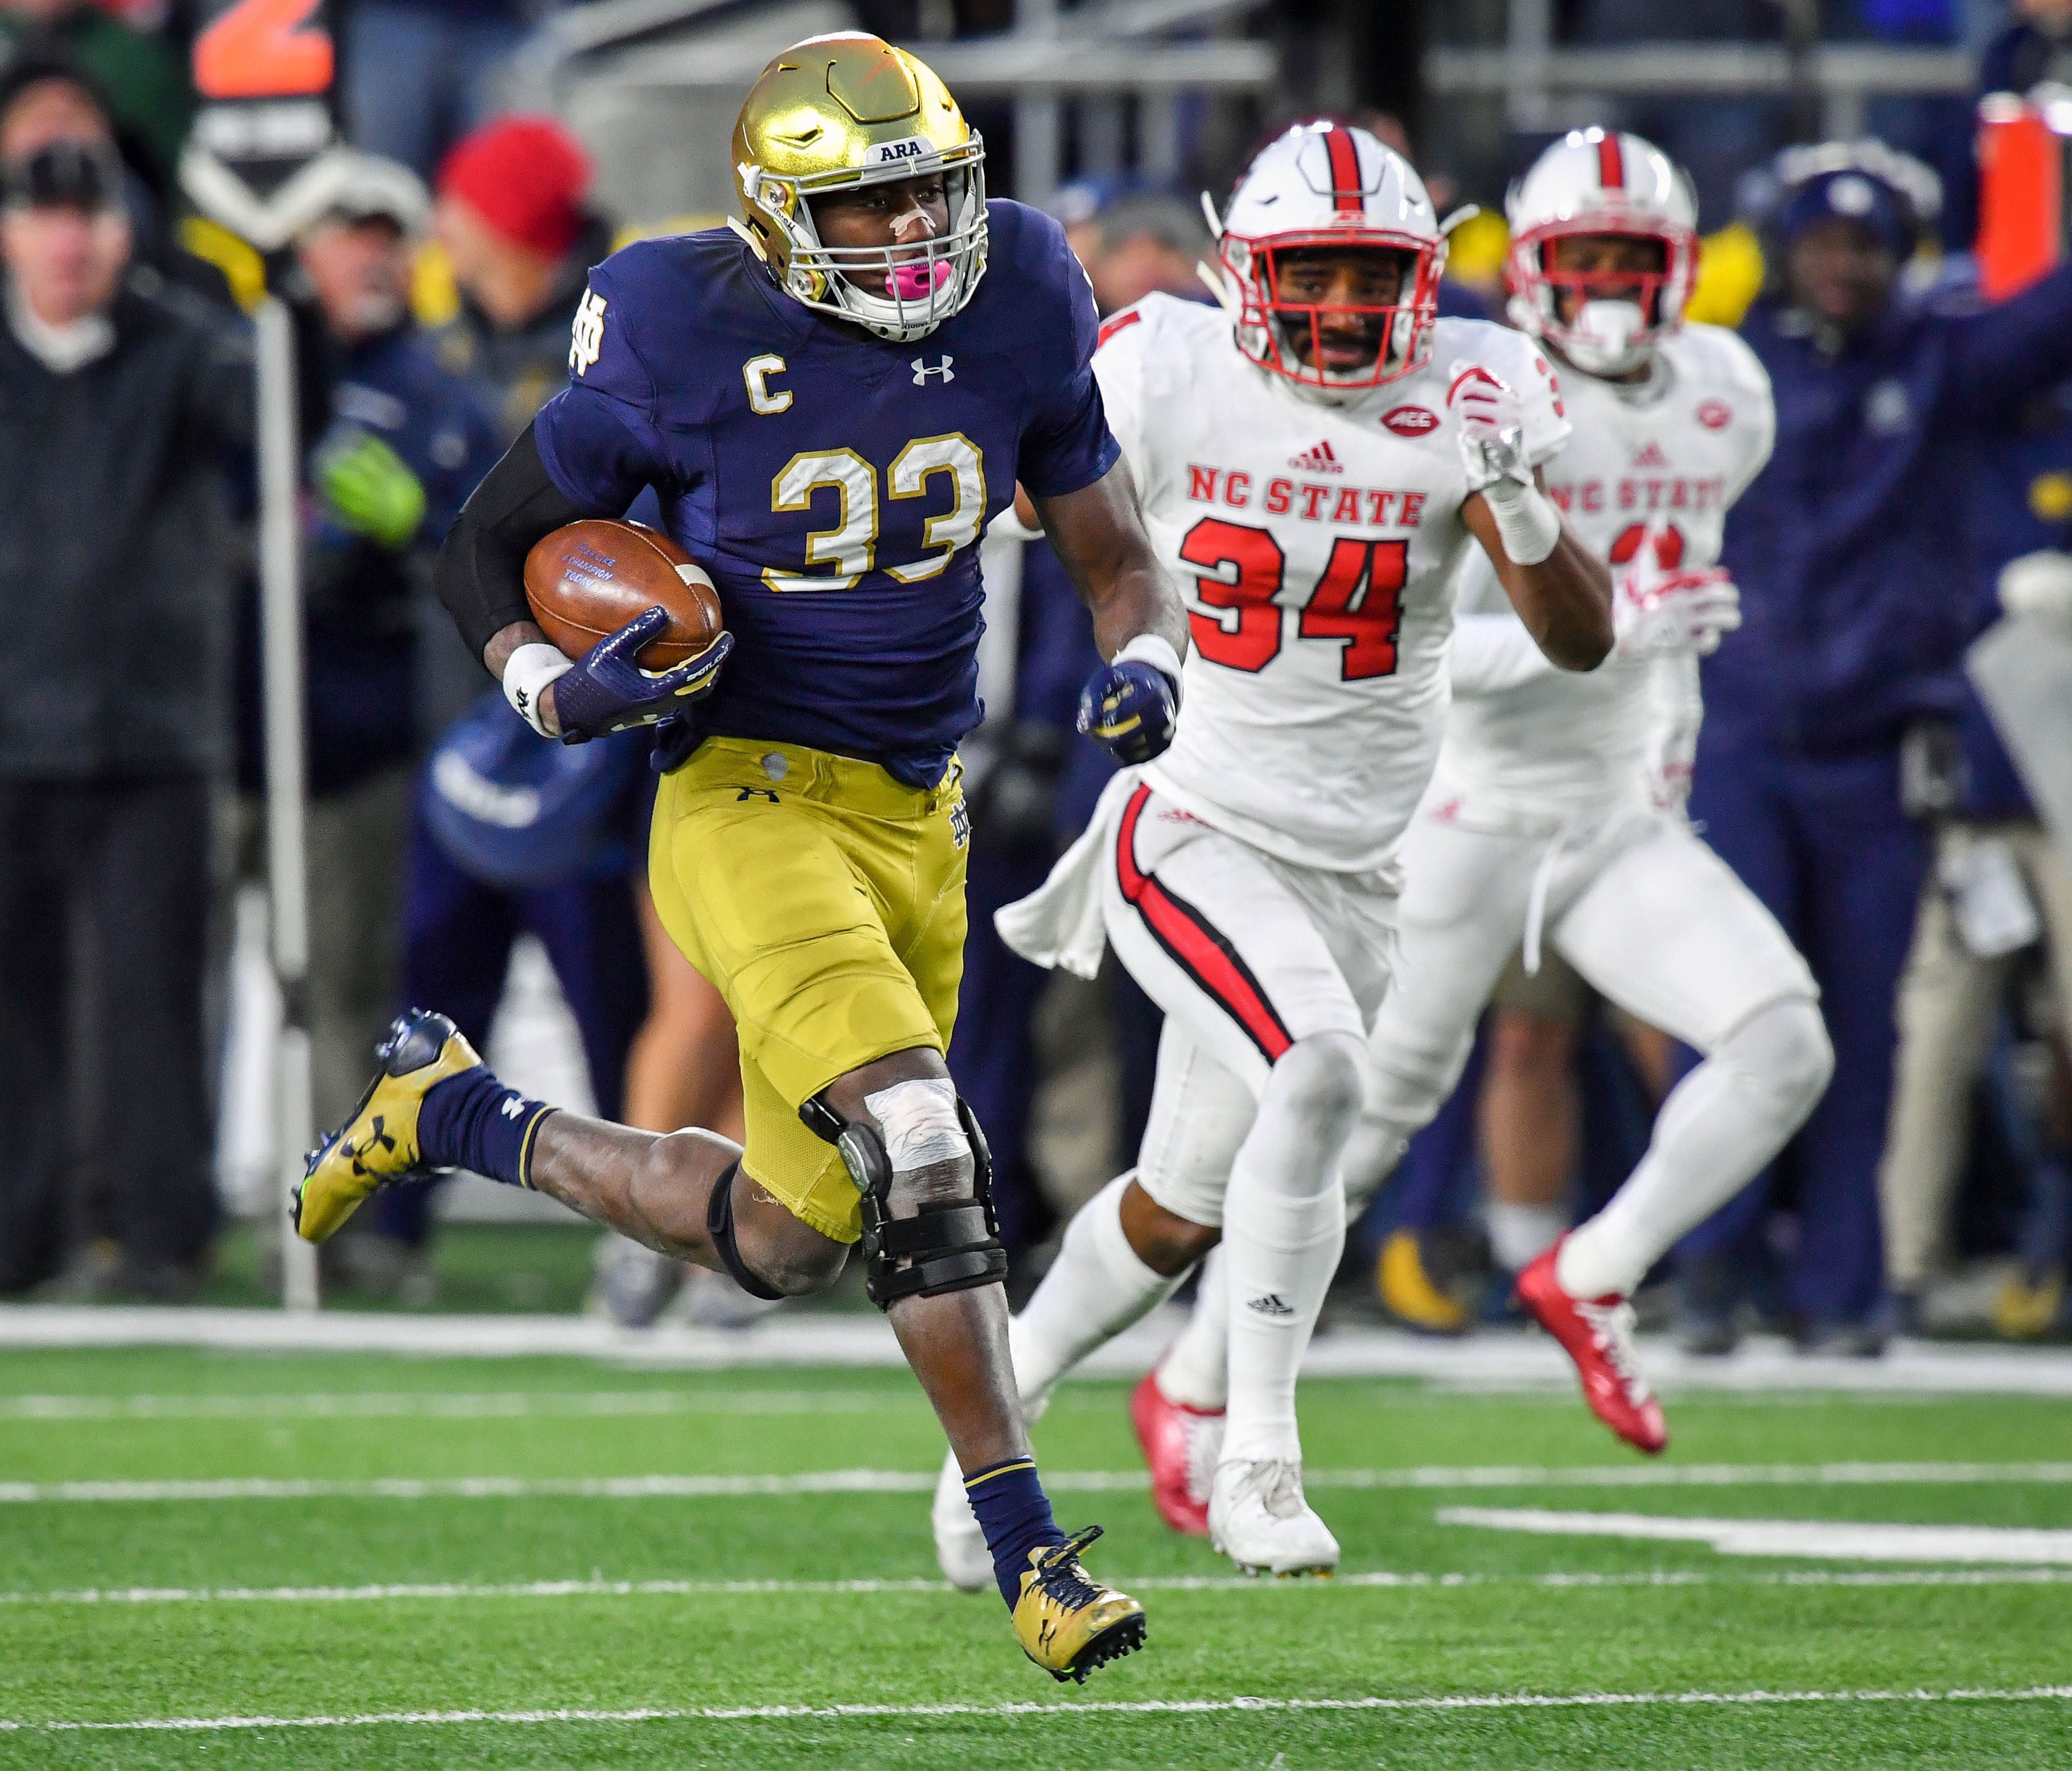 Notre Dame Fighting Irish running back Josh Adams (33) runs for a touchdown as North Carolina State Wolfpack safety Tim Kidd-Glass (34) pursues in the third quarter at Notre Dame Stadium.